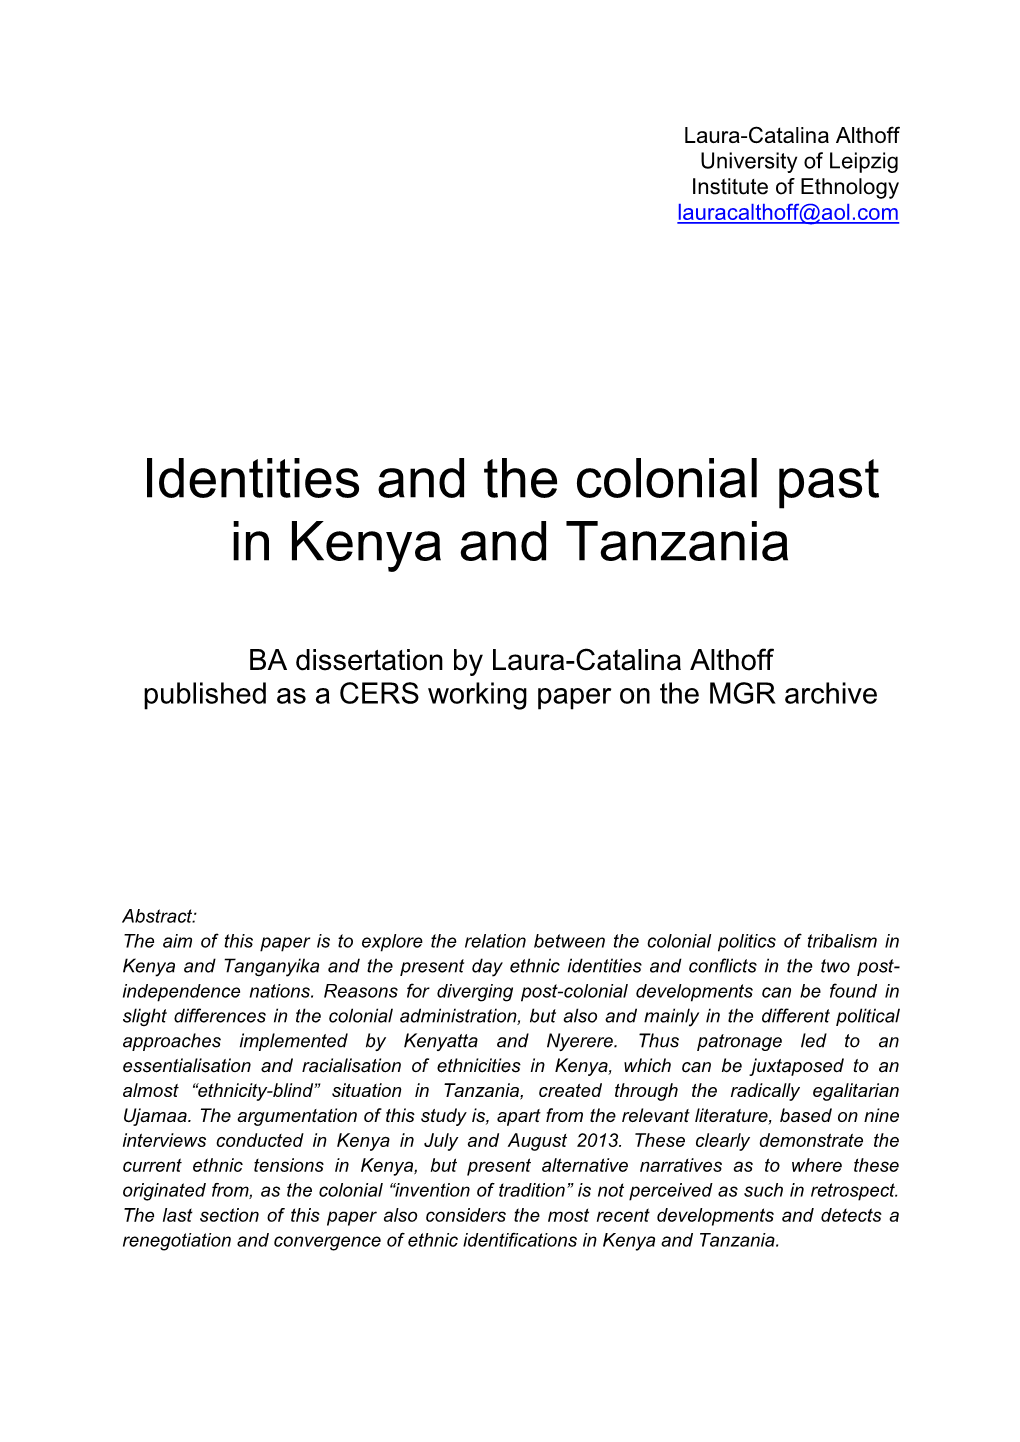 Identities and the Colonial Past in Kenya and Tanzania